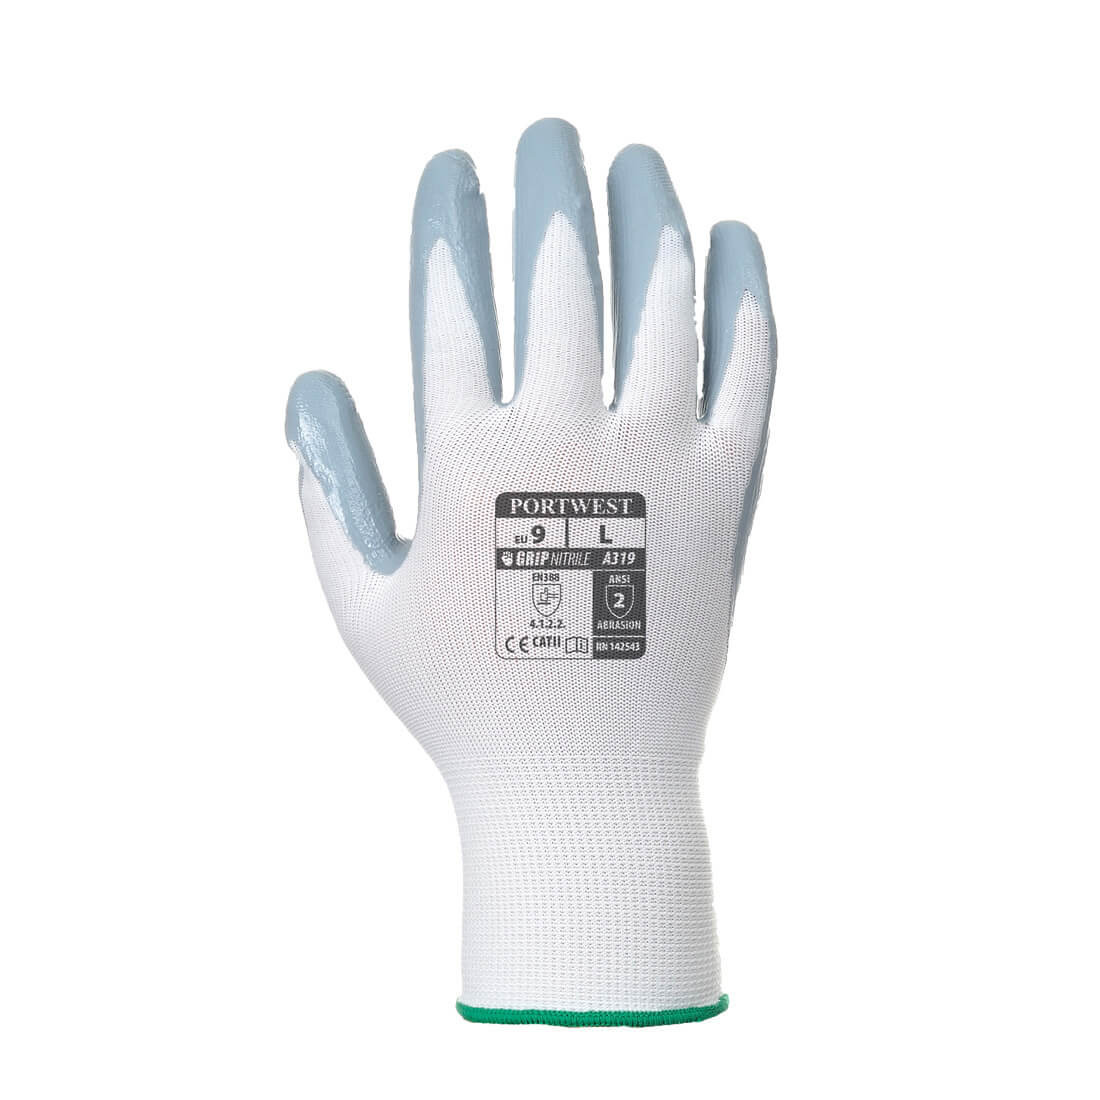 Flexo Grip Nitrile Glove (with merchandise bag) - Personal protection